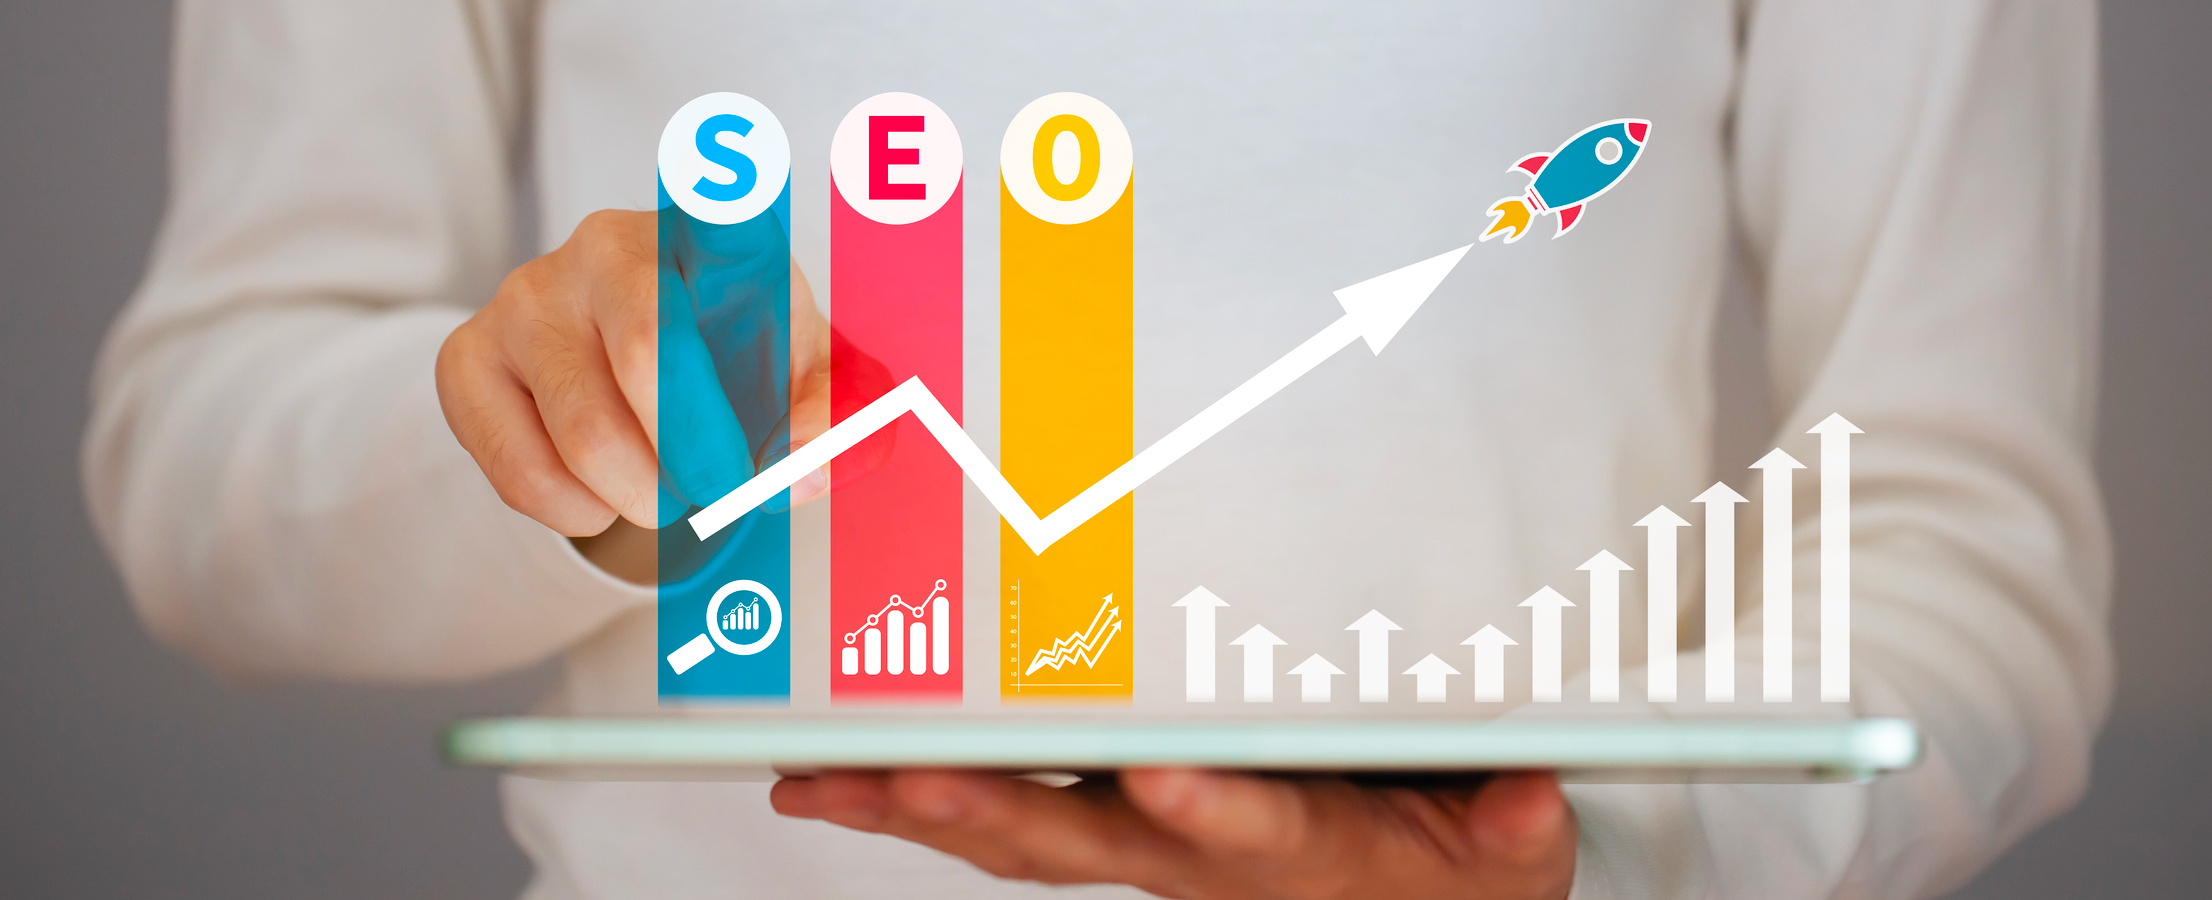 Business Booster Auckland, New Zealand, Affordable SEO, trusted and operating since 2009. Organic SEO, On-Site SEO, Off-Site SEO